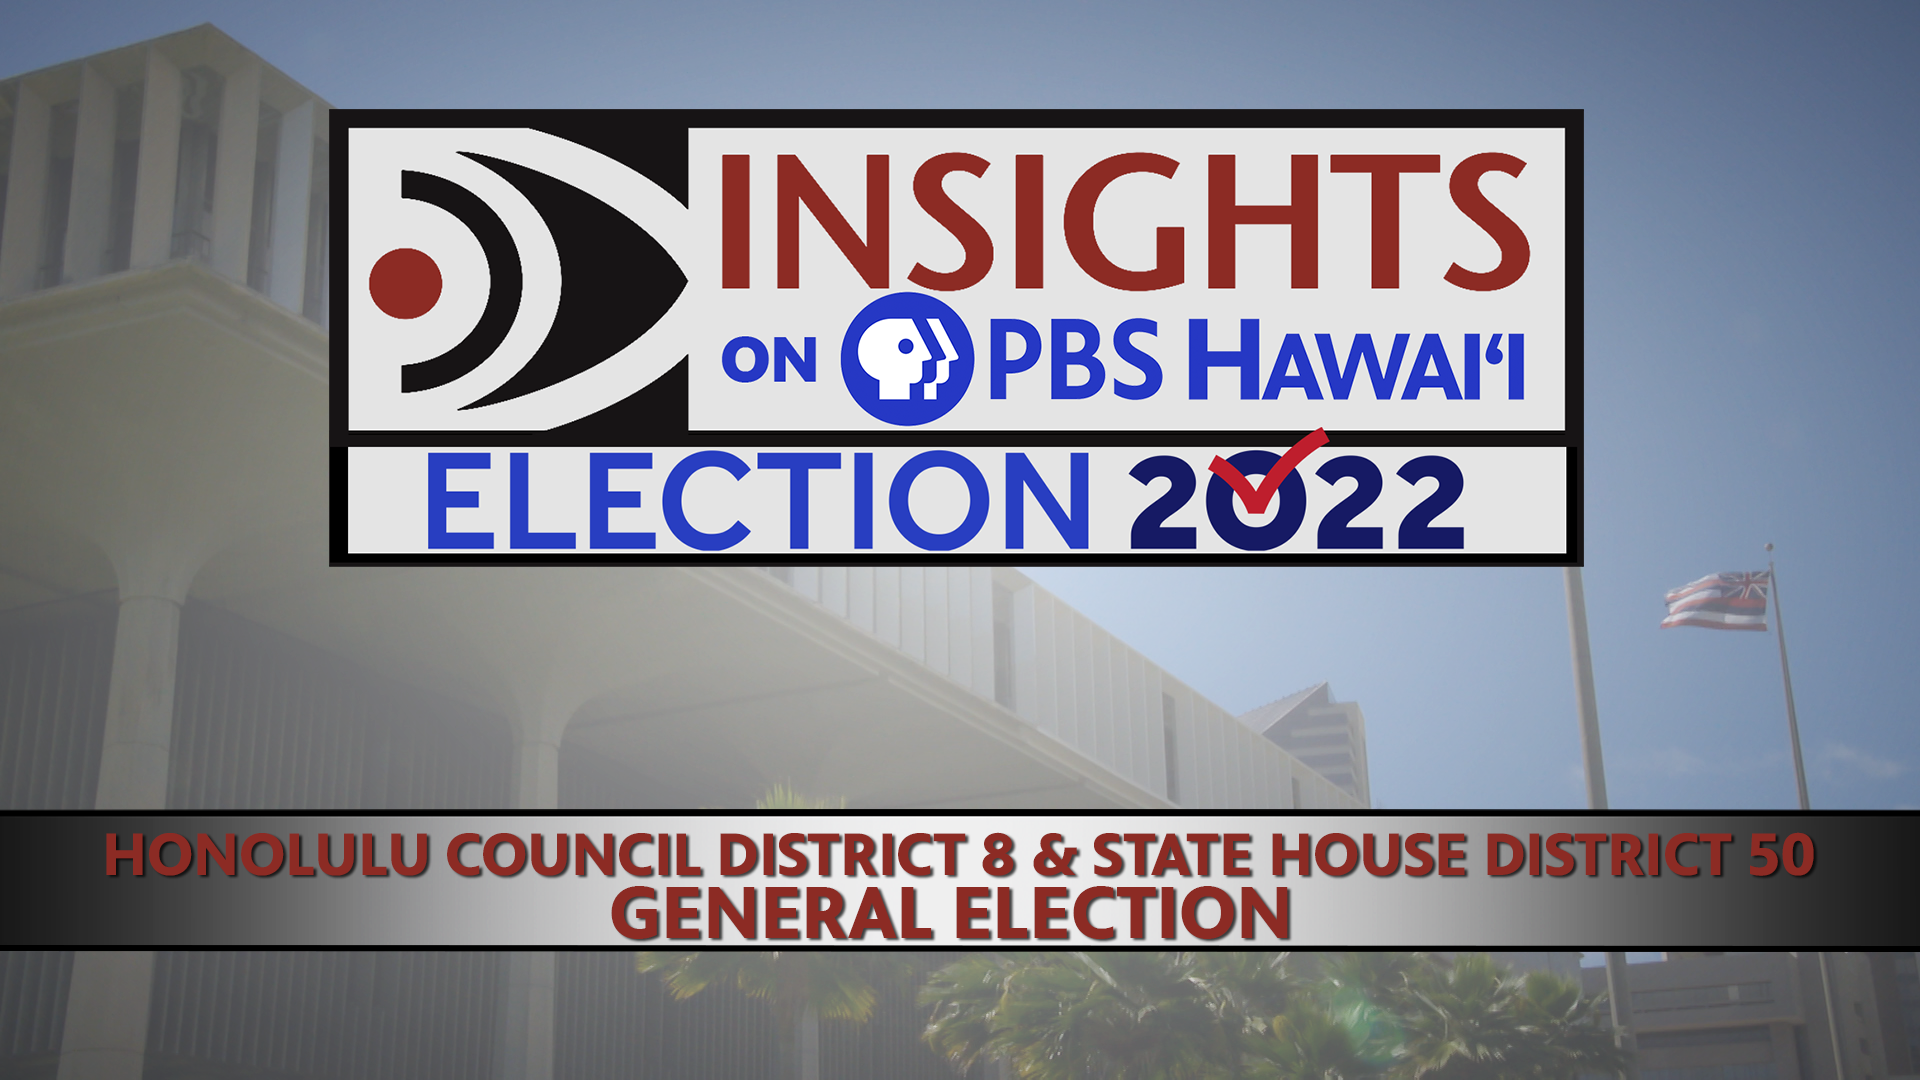 HONOLULU CITY COUNCIL DISTRICT 8 AND STATE HOUSE DISTRICT 50